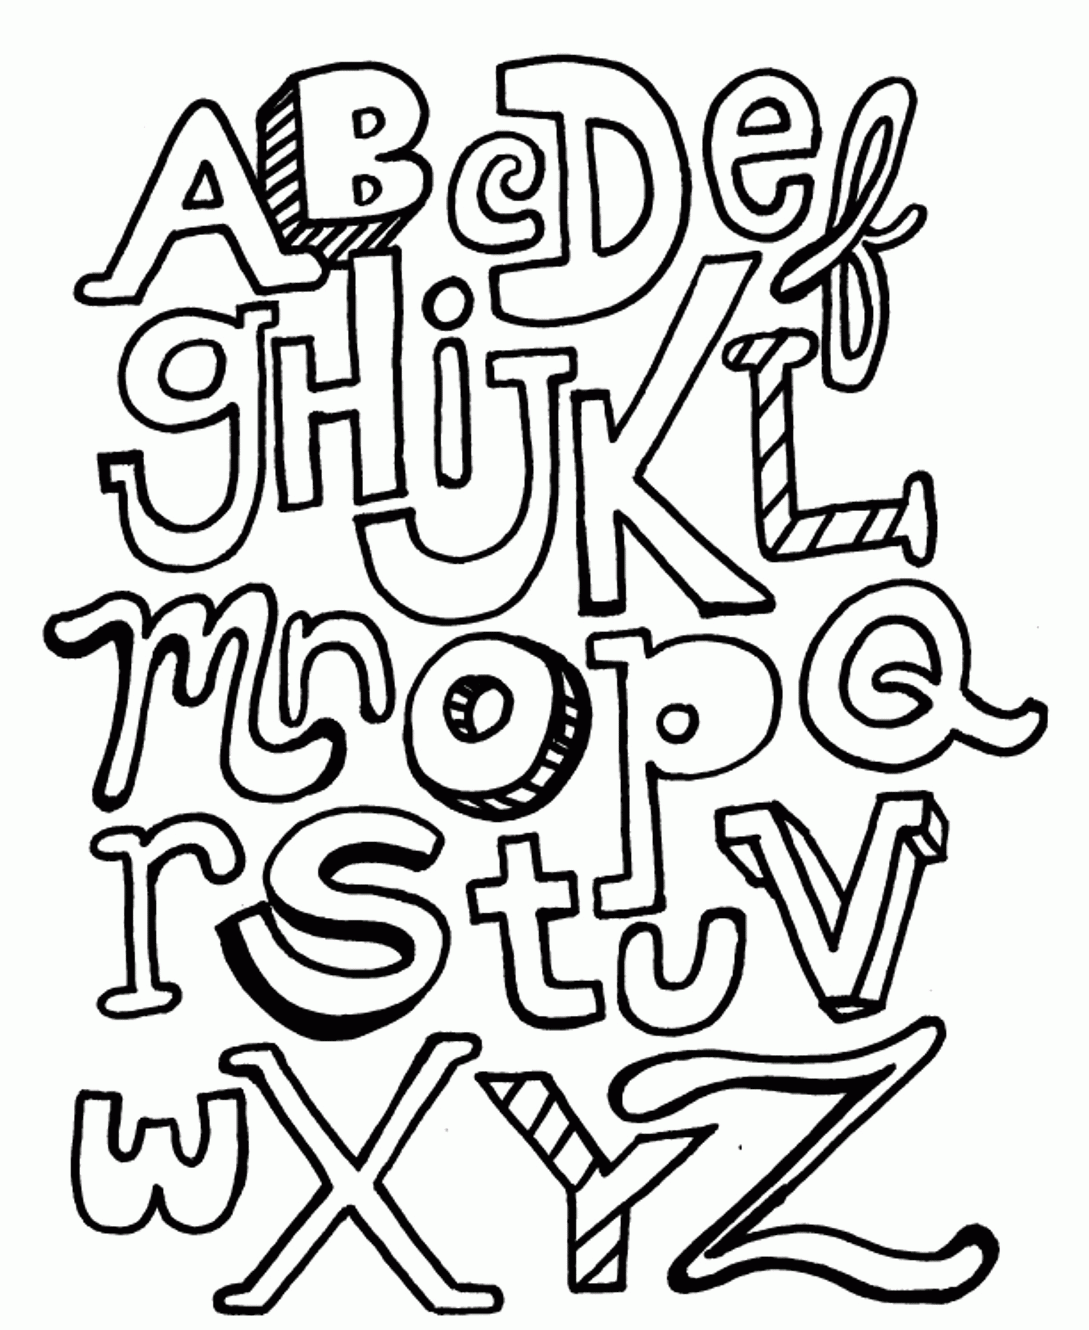 Free Printable Alphabet Coloring Pages A-z - Coloring Home